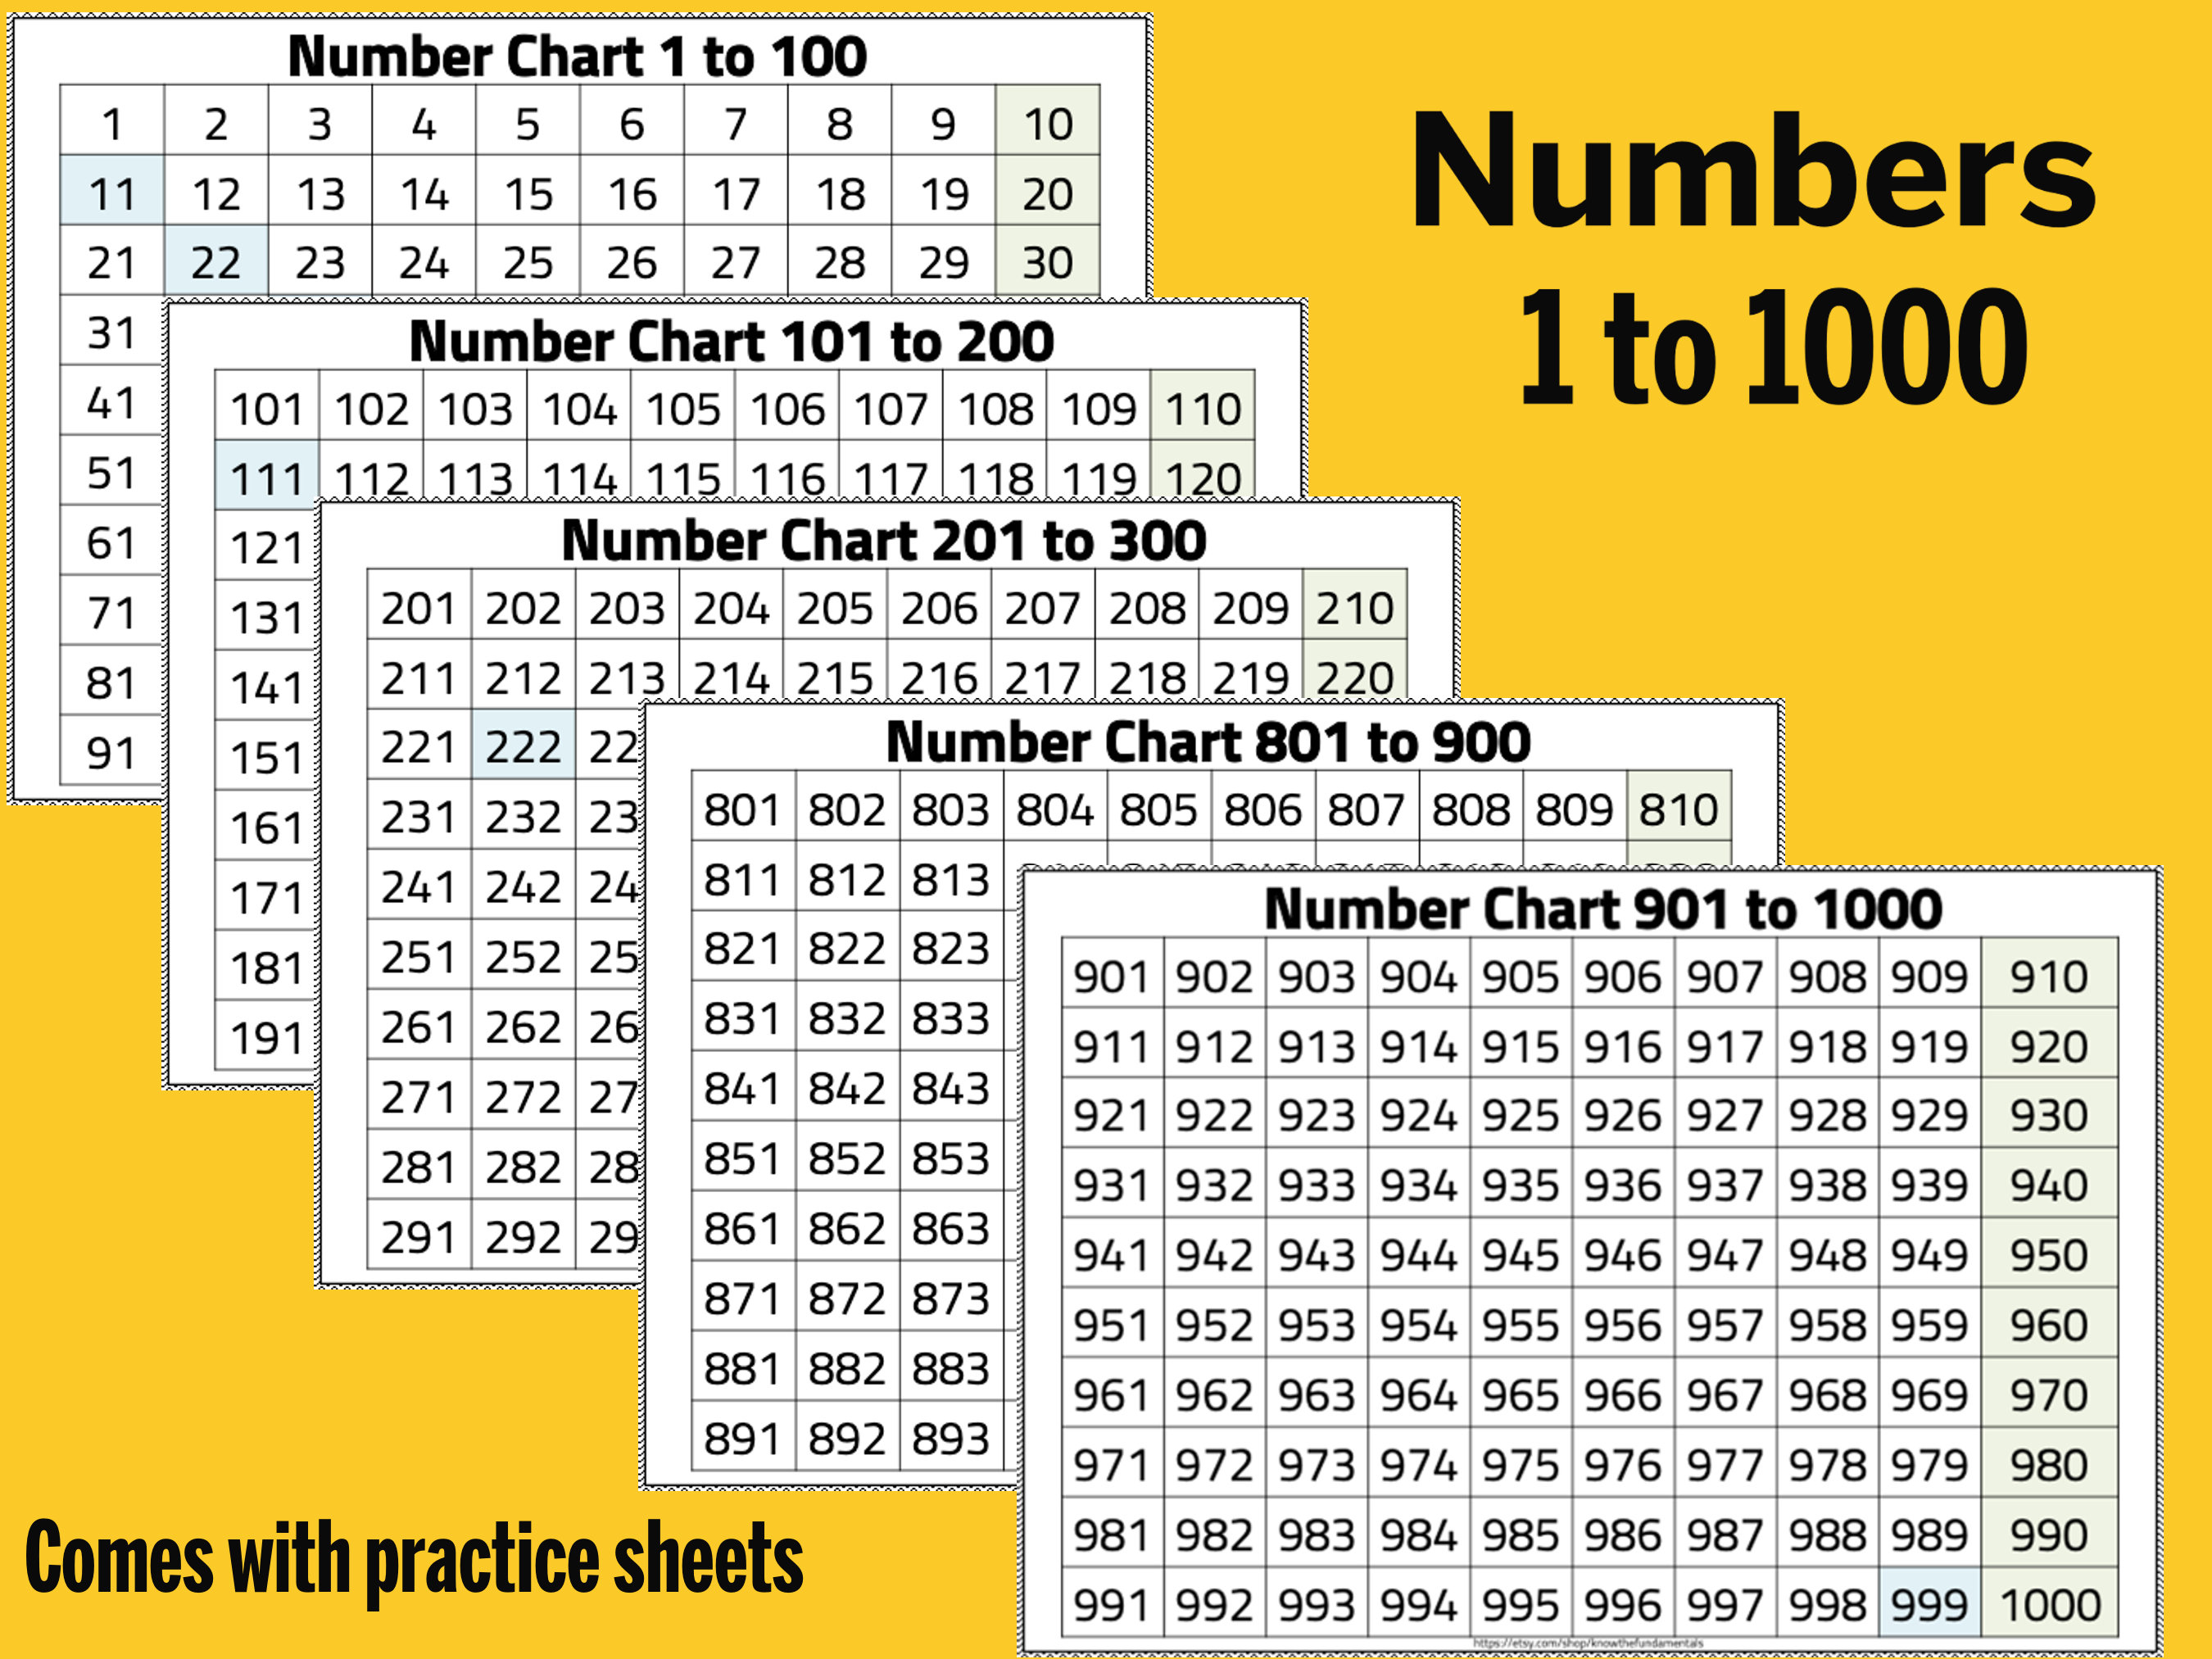 buy-number-chart-1-1000-numbers-1-to-1000-chart-thousands-online-in-india-etsy